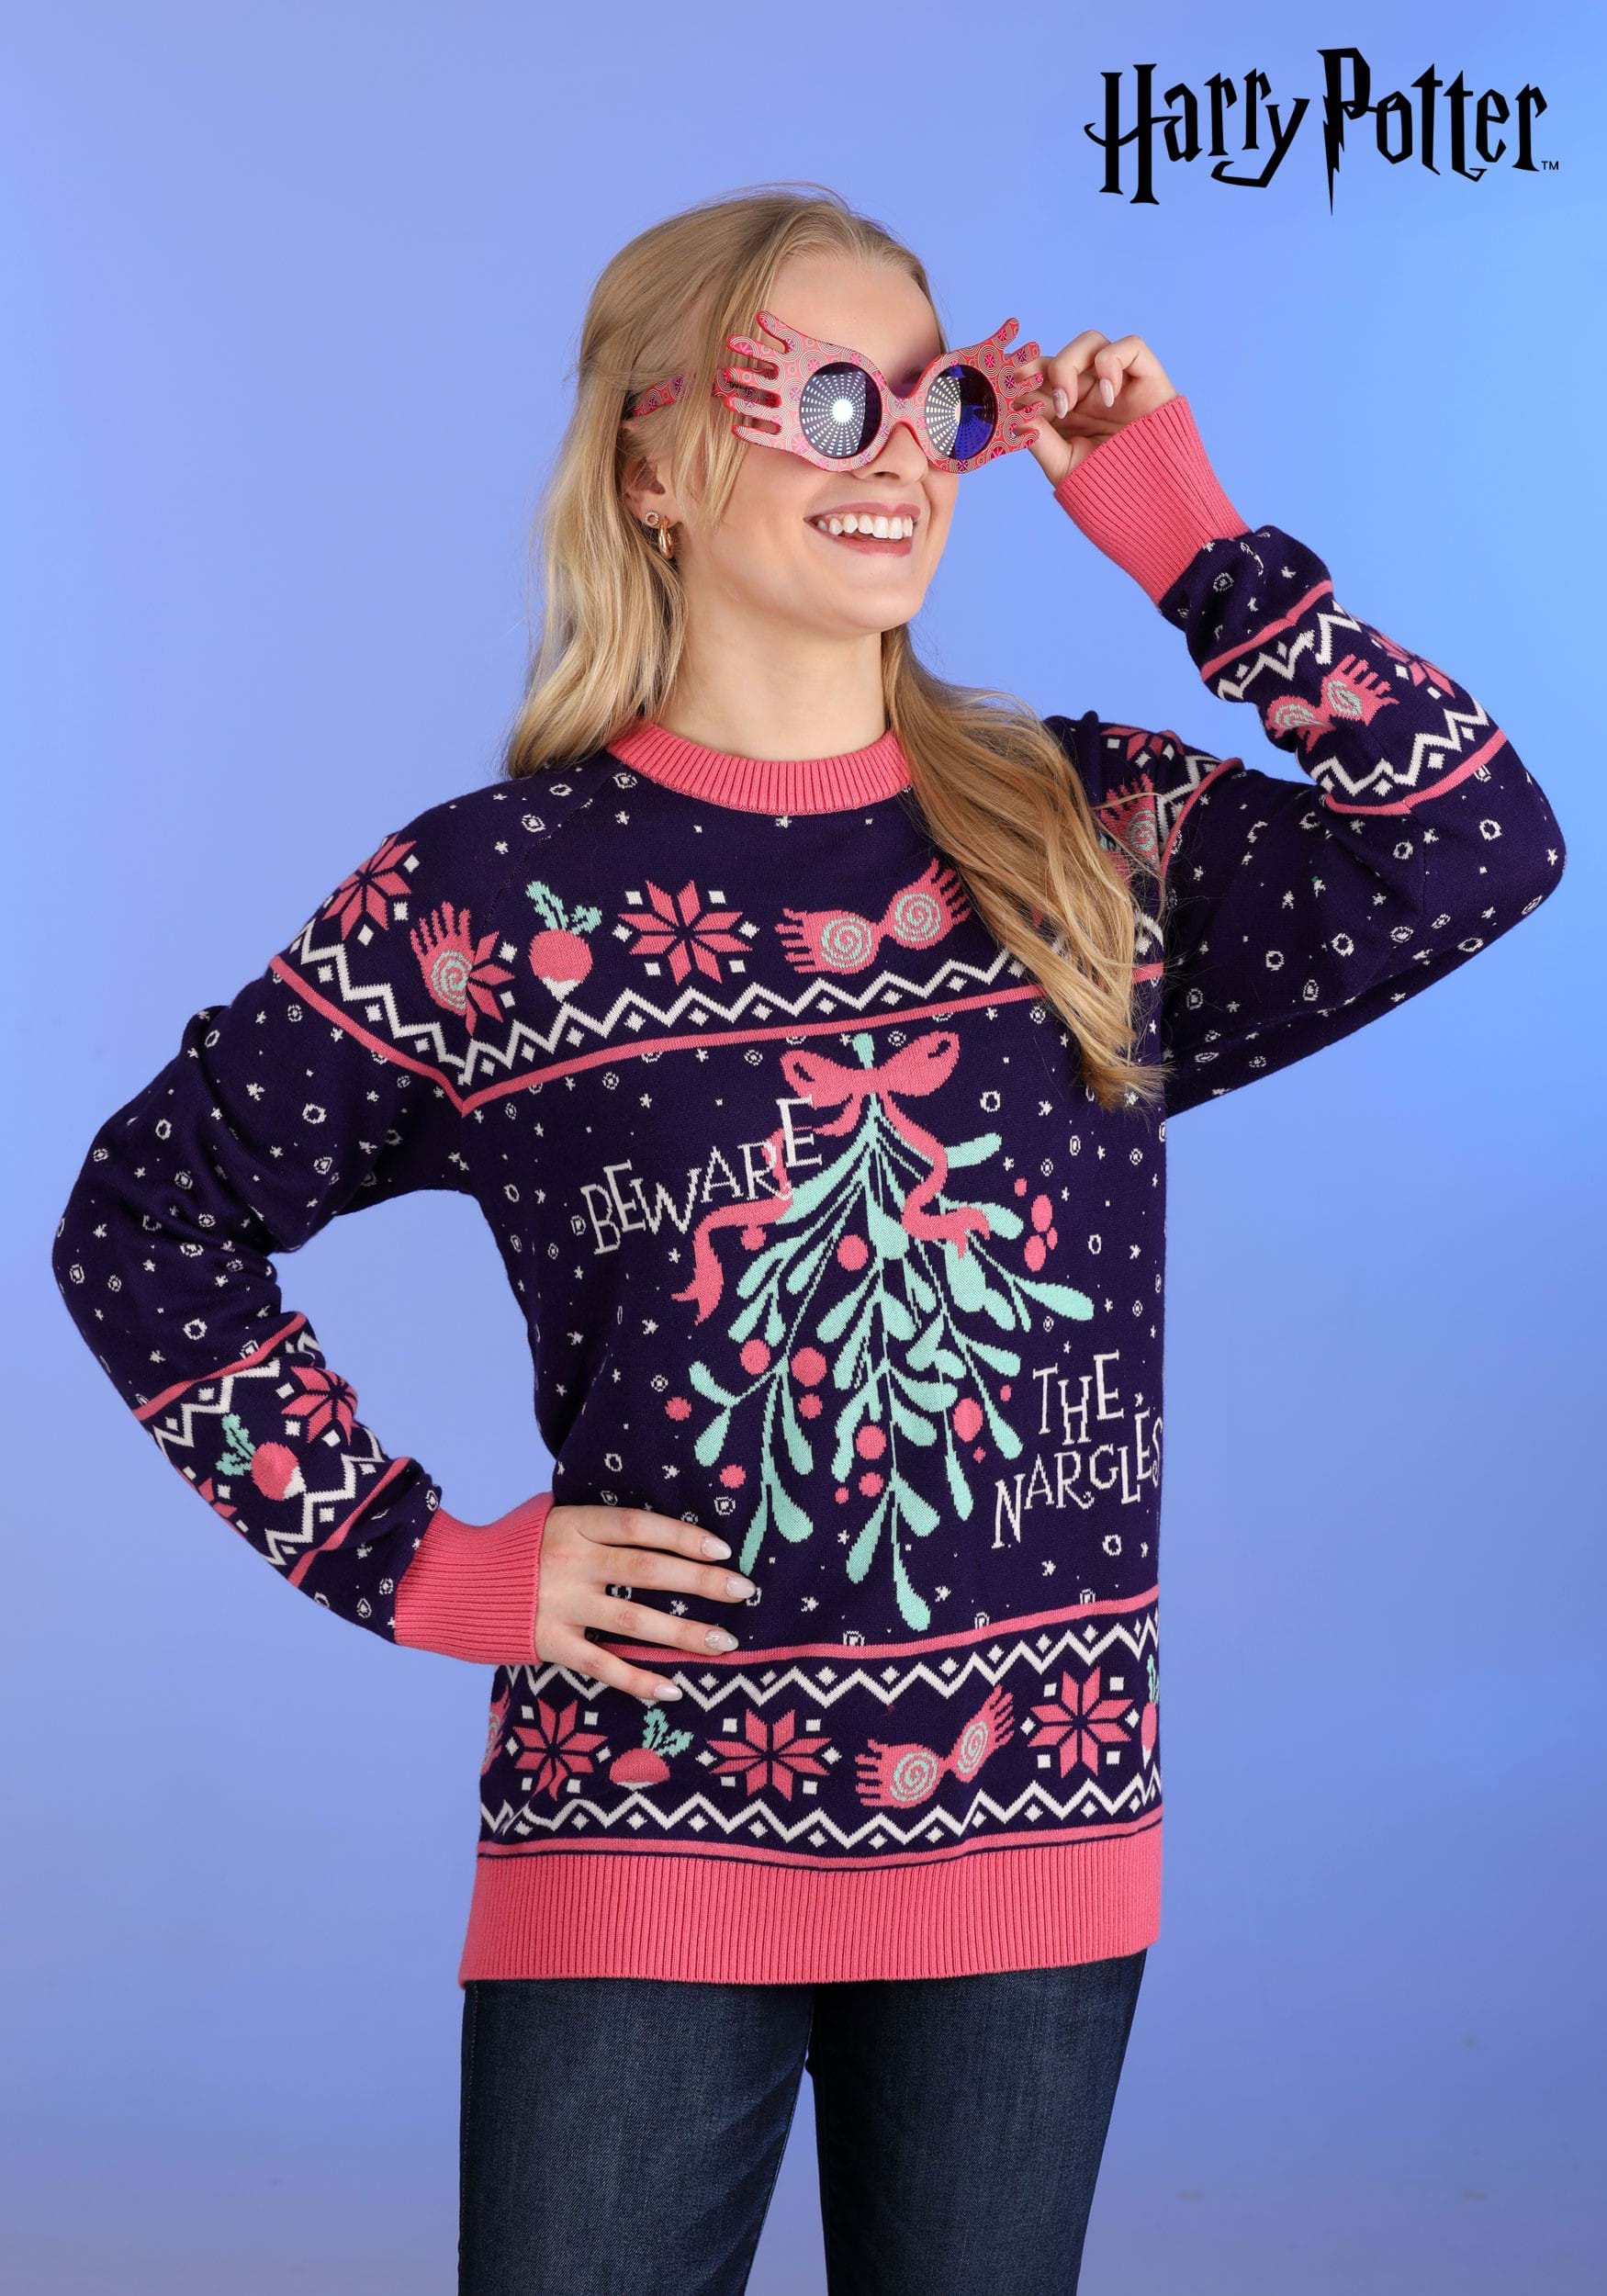 9 Christmas Sweaters That Will Get You In The Holiday Spirit